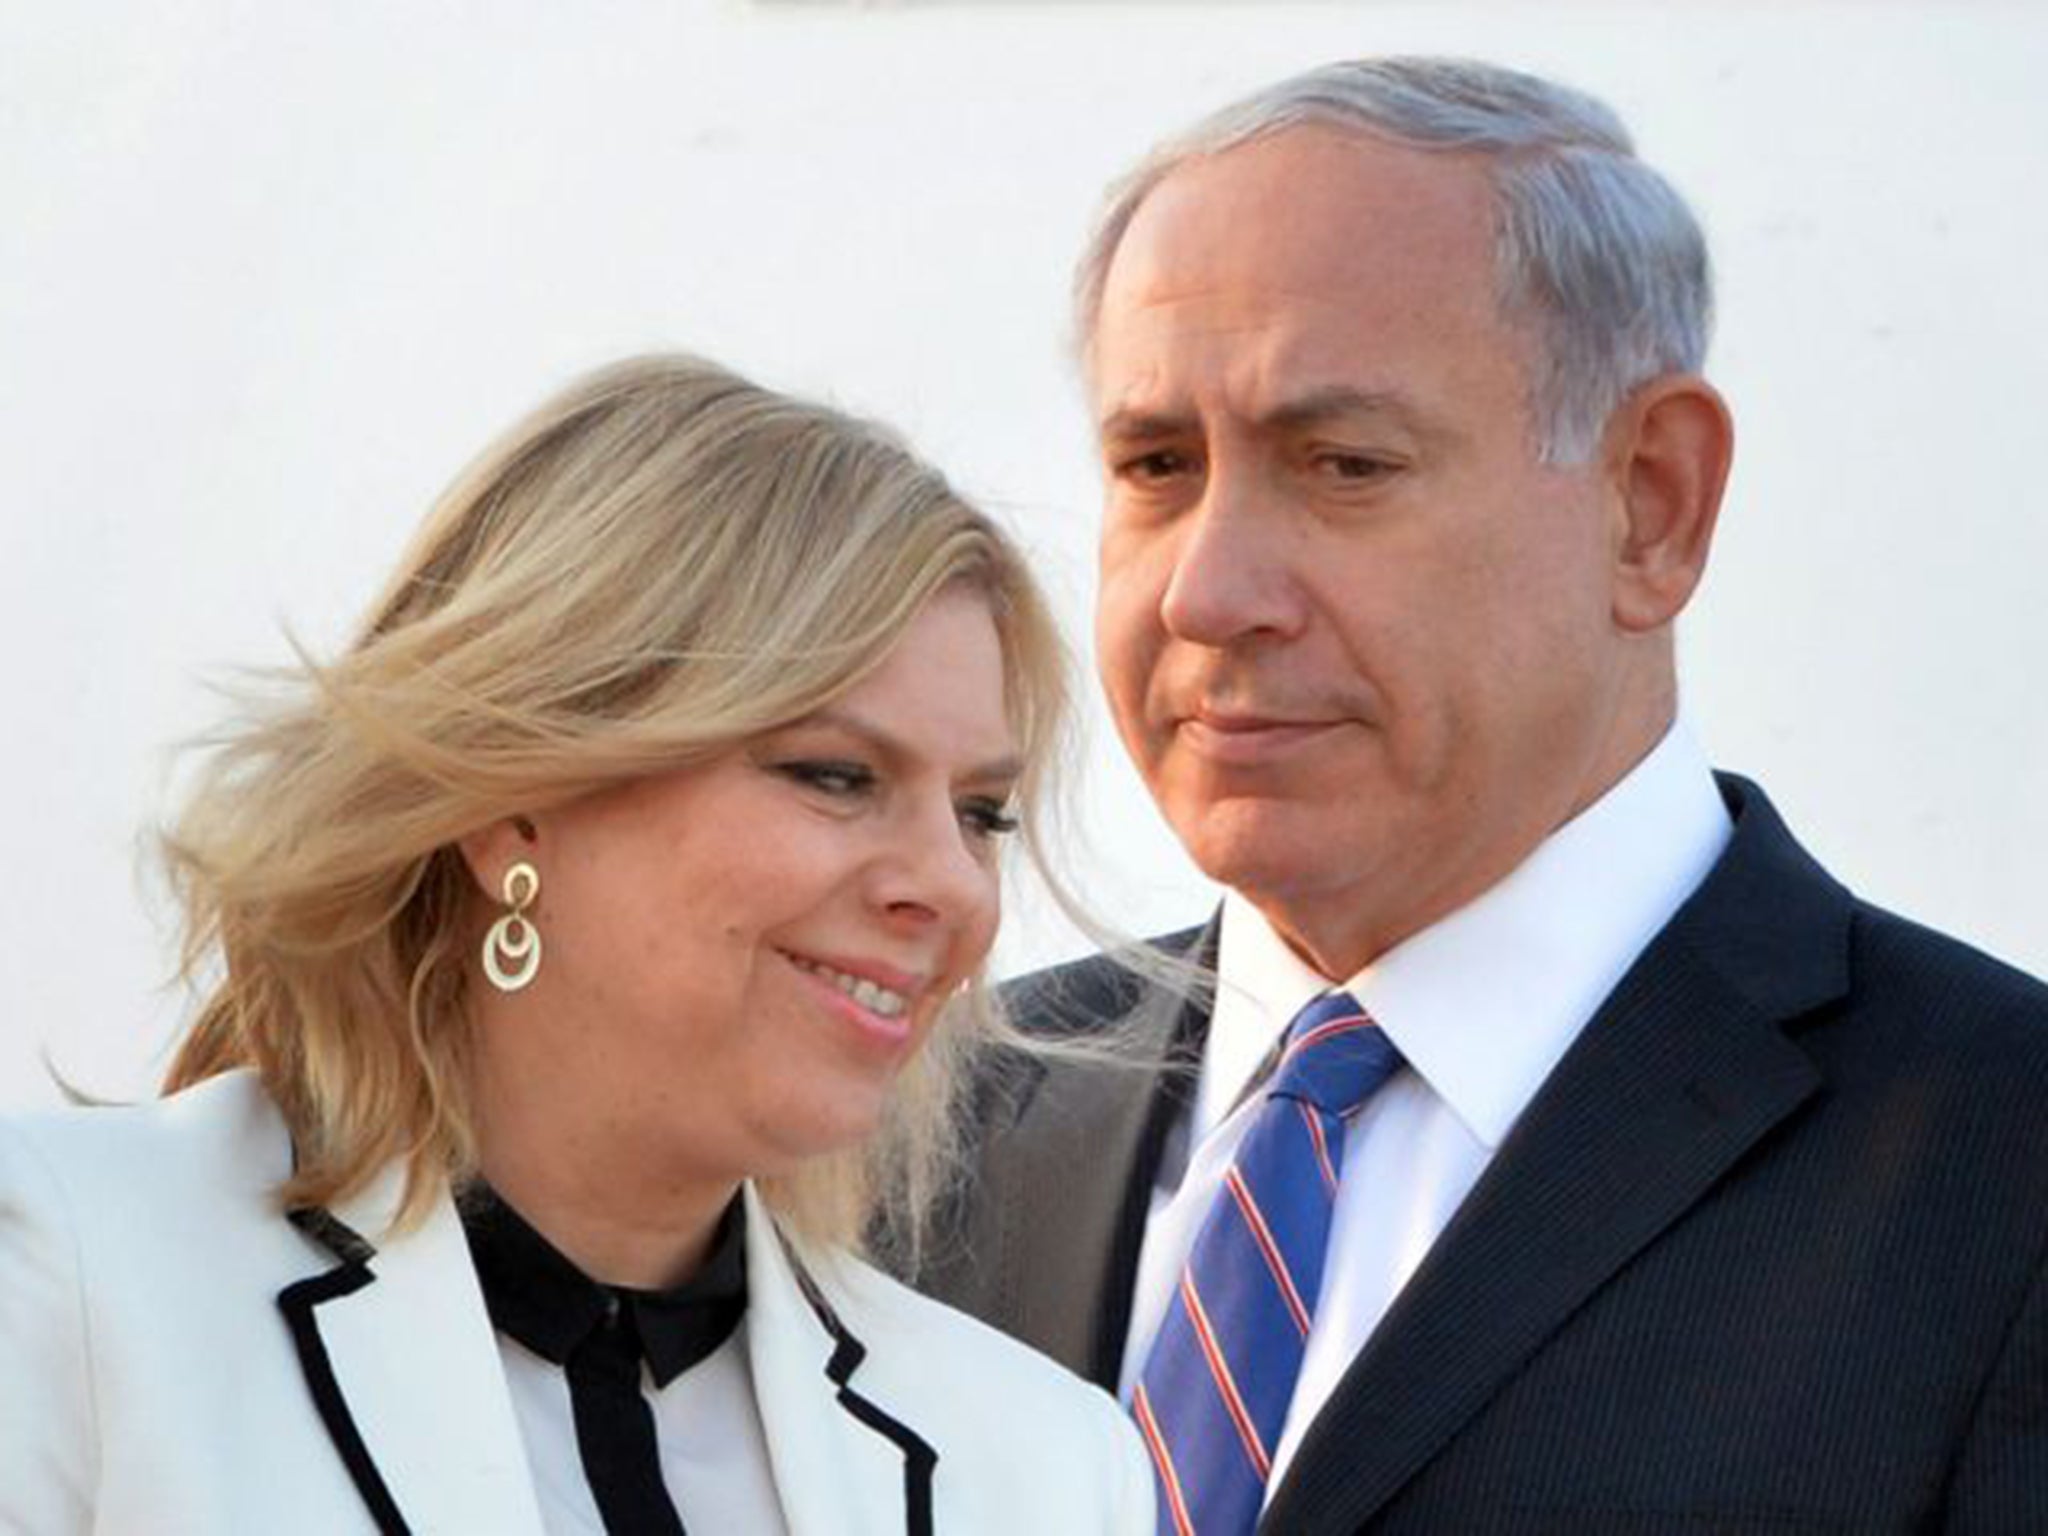 Israeli Prime Minister Benjamin Netanyahu and his wife Sara have been accused of wasting taxpayers’ cash